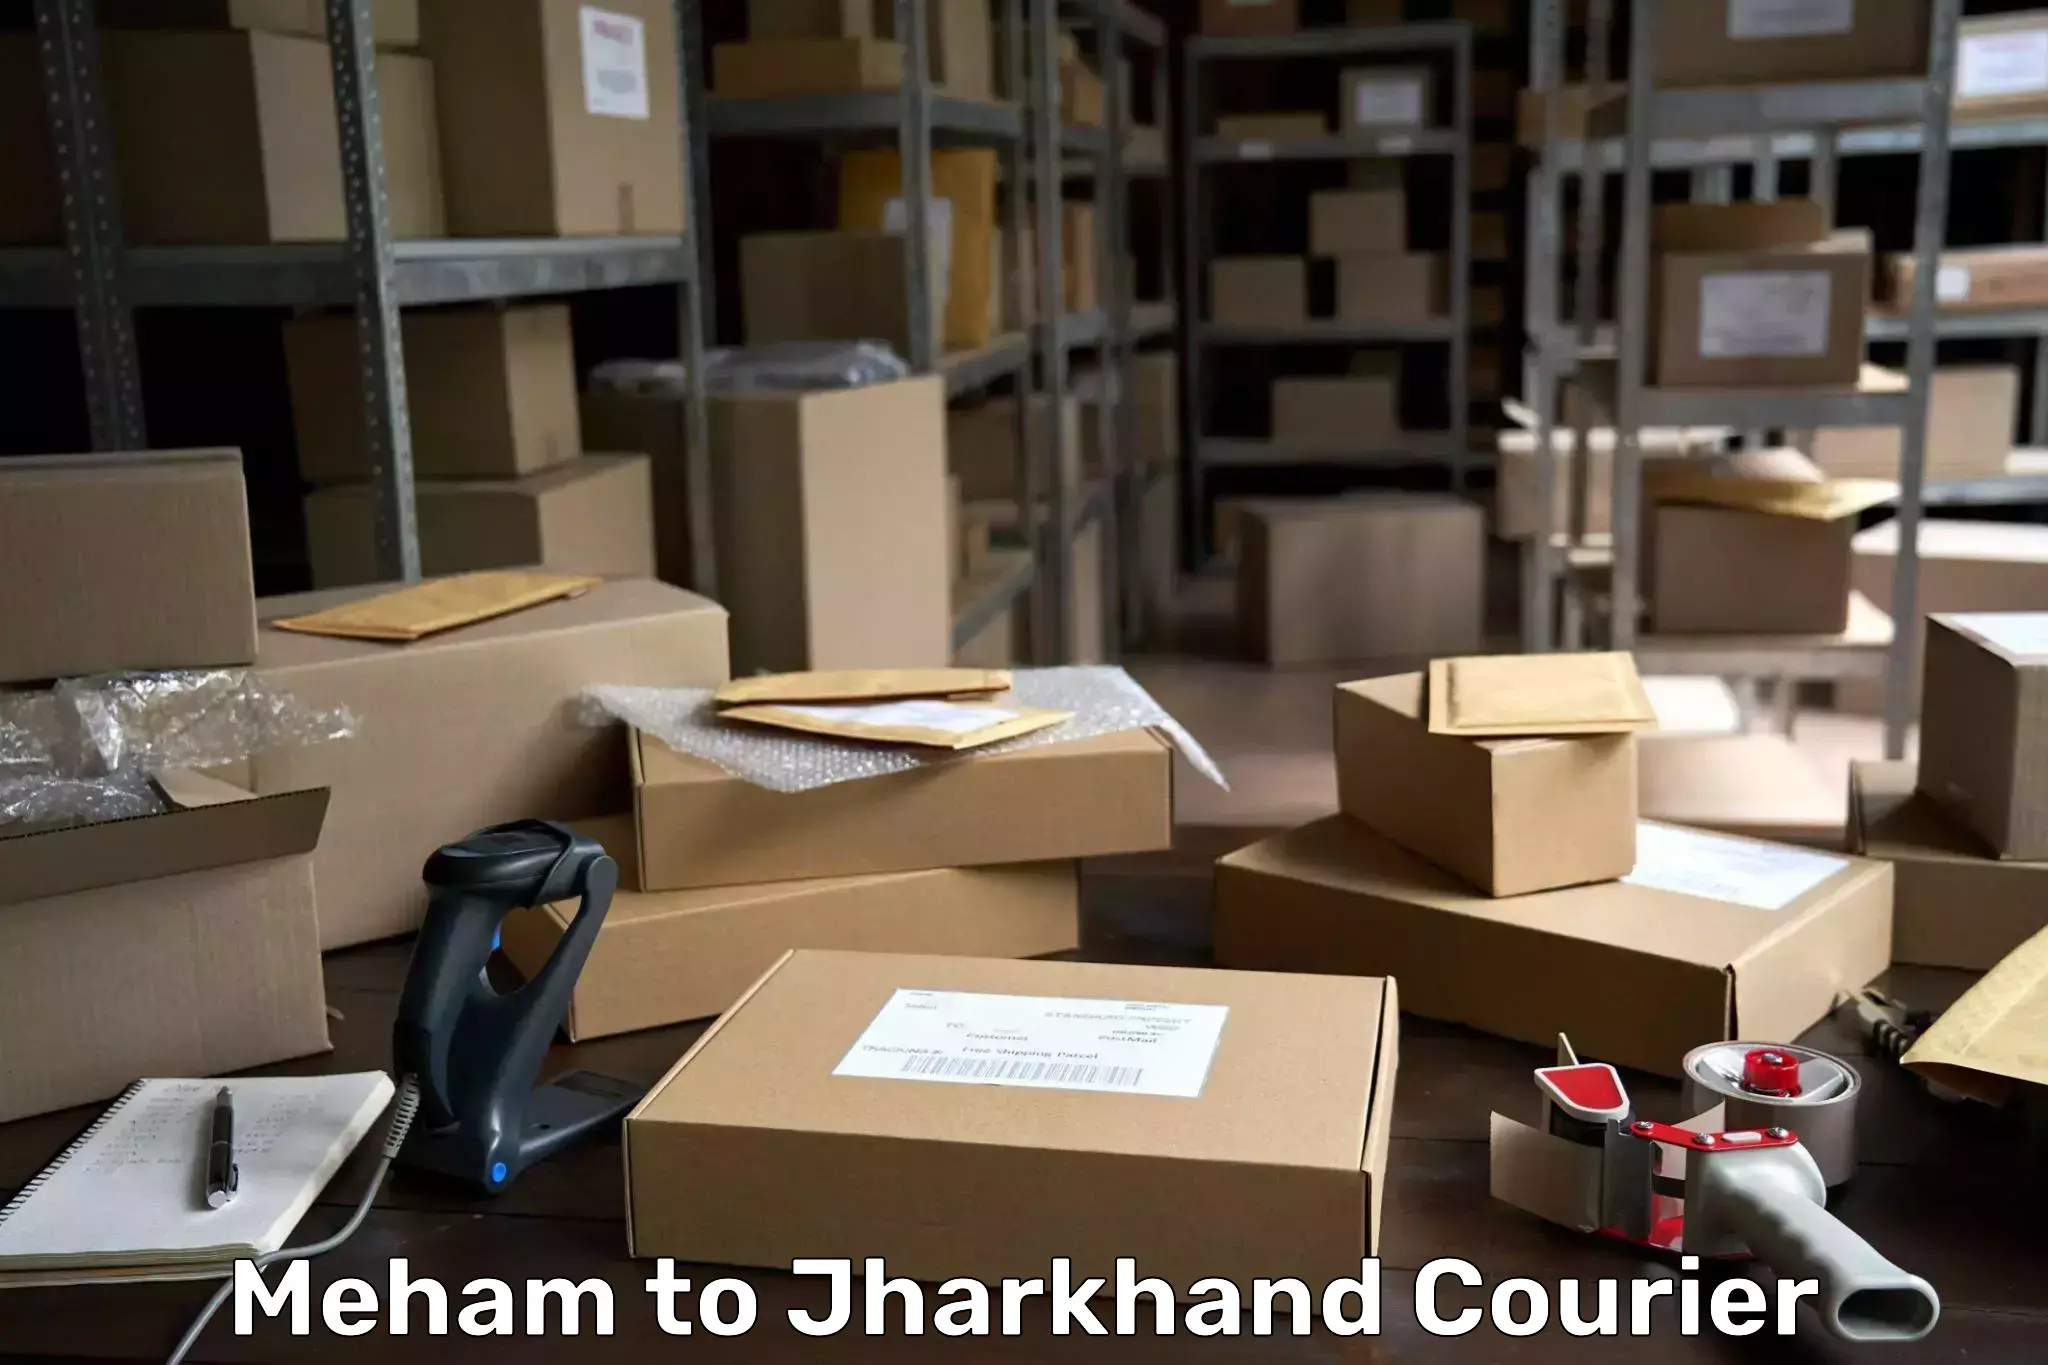 Express package handling Meham to Domchanch